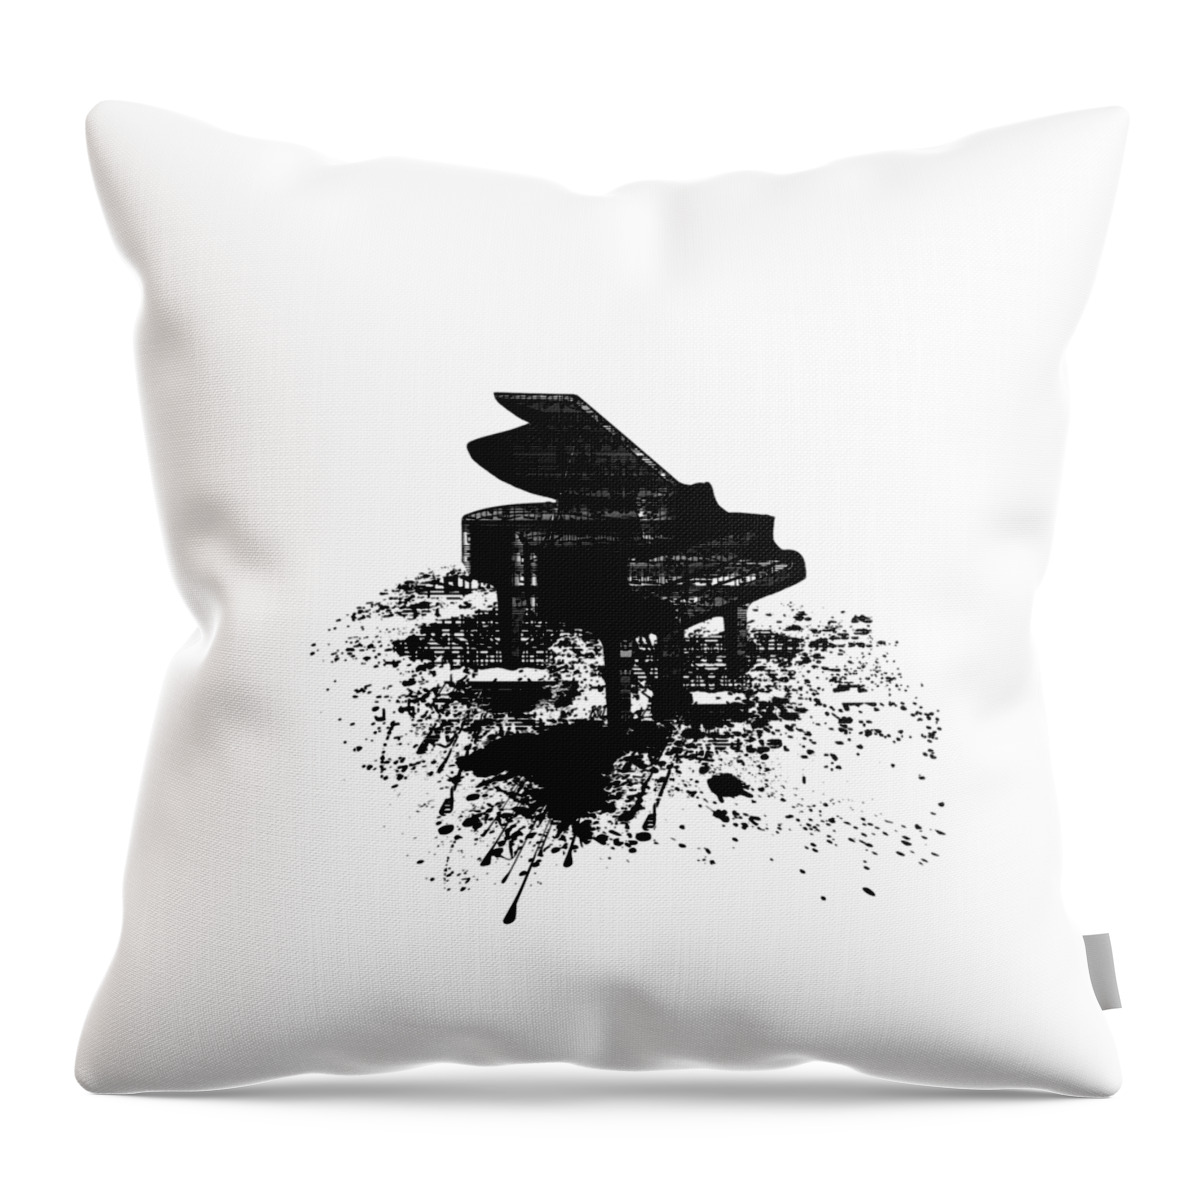 Ink Throw Pillow featuring the digital art Inked Piano by Barbara St Jean